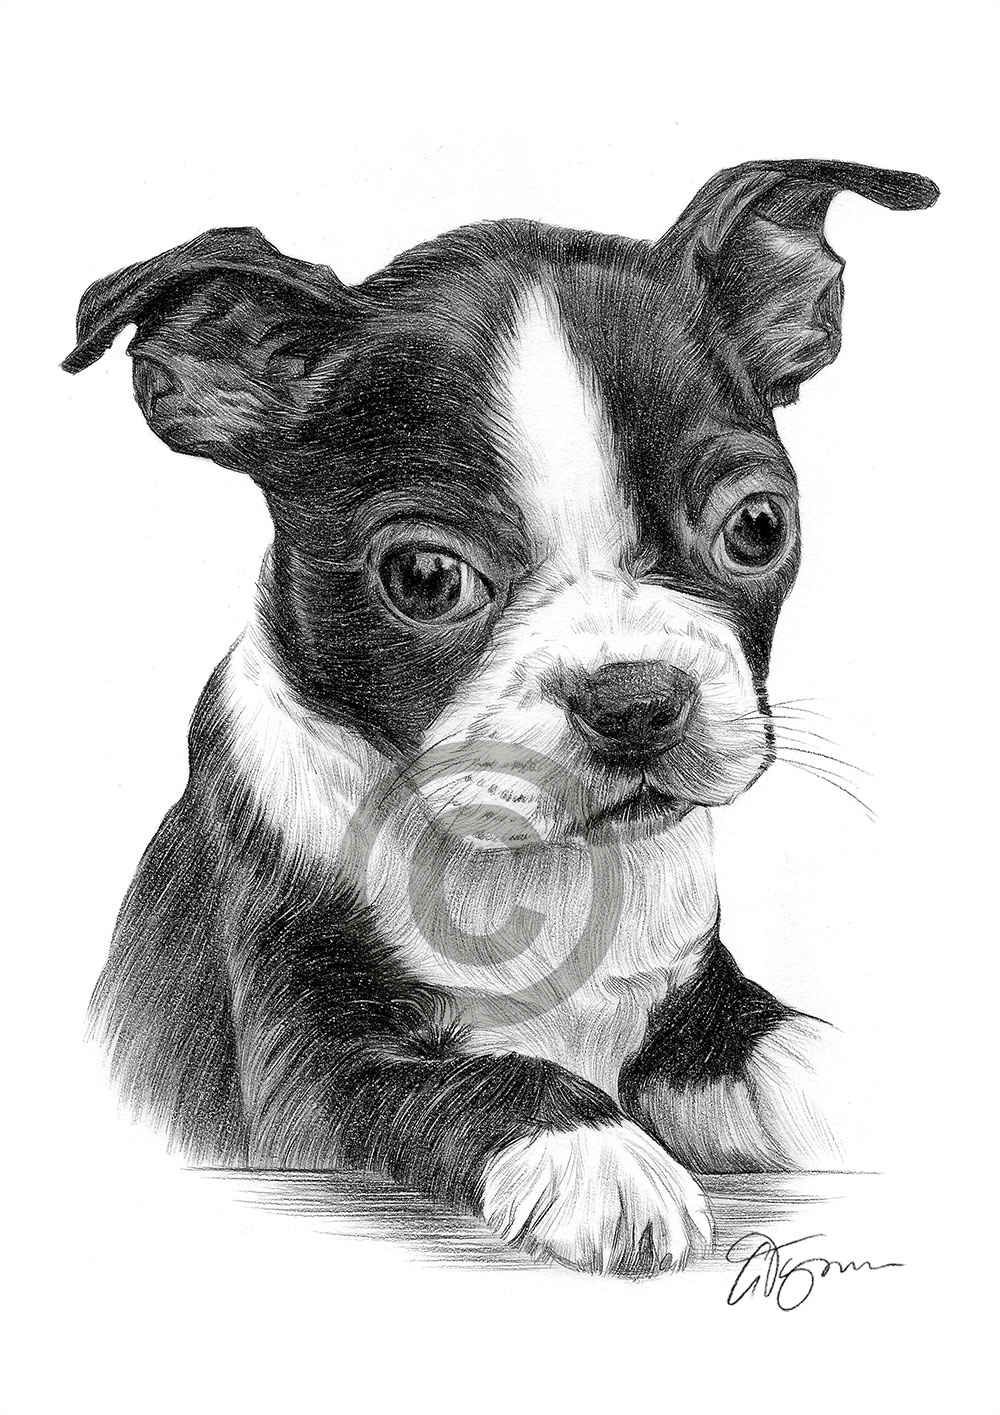 Pencil drawing of a Boston Terrier puppy by artist Gary Tymon